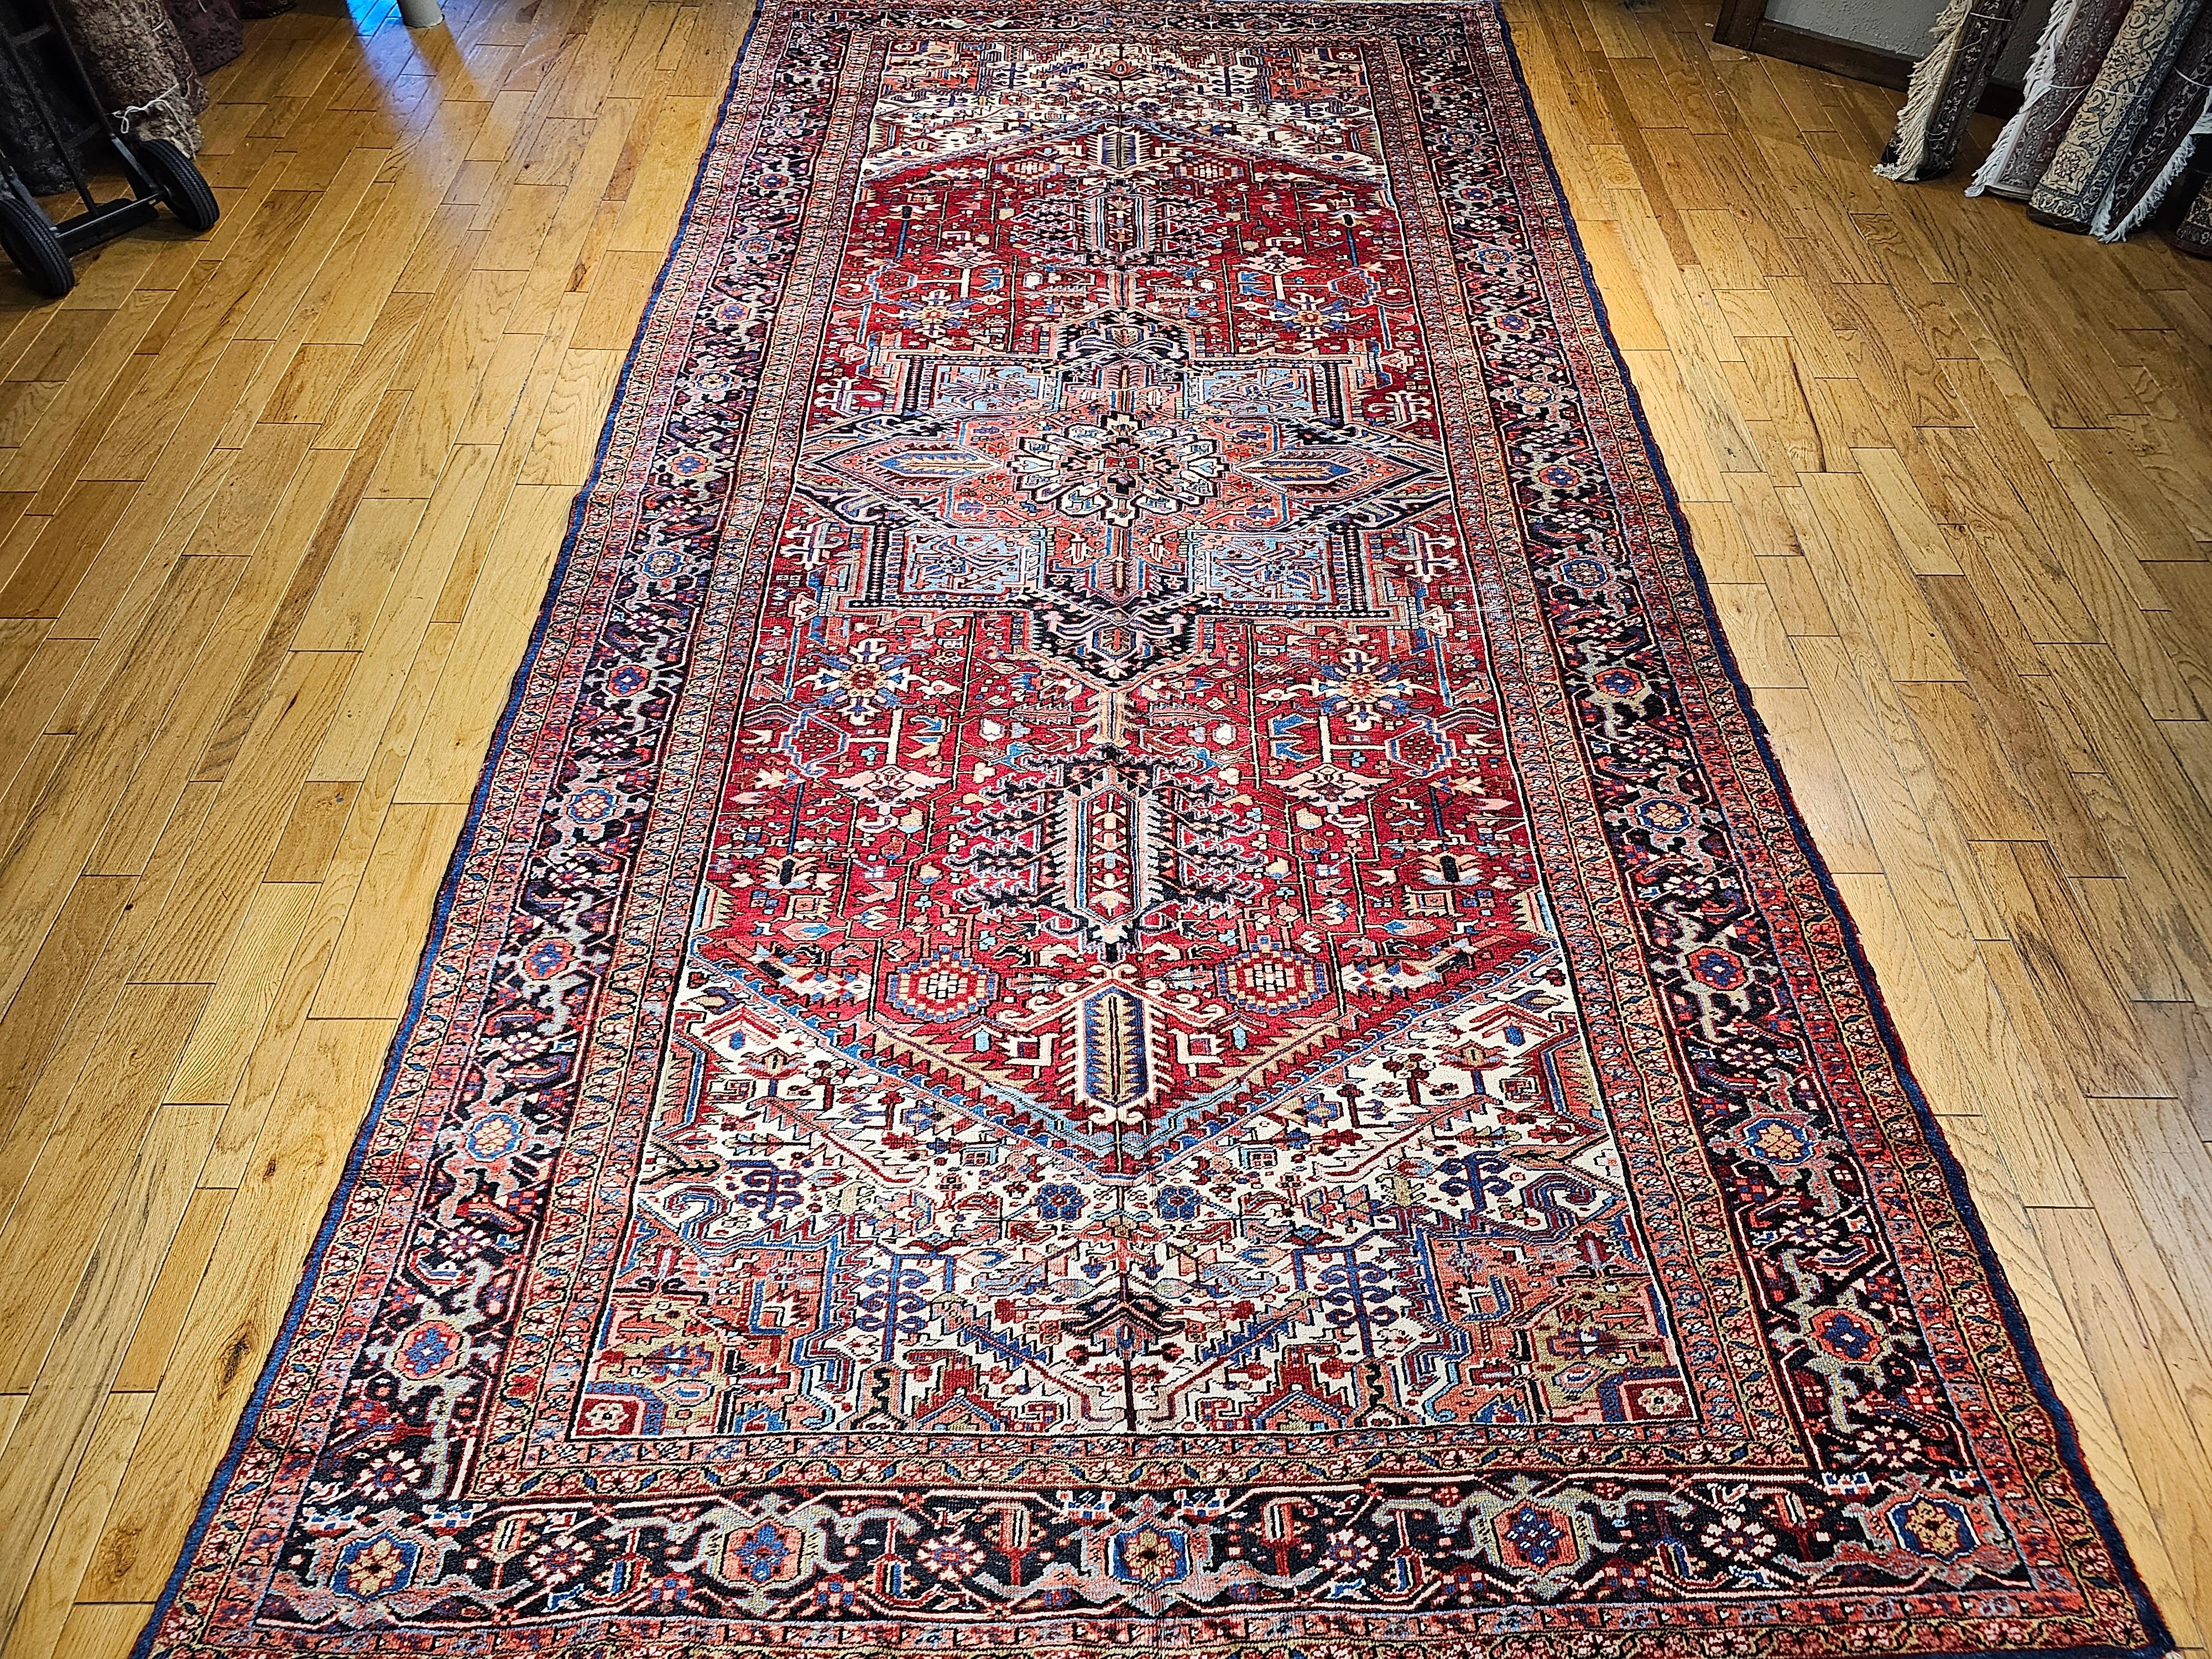 An oversized Heriz Serapi rug from the Azerbaijan region of Northwest Persia. The Heriz rugs have ageless beauty and because of the use of natural dyes, they develop more beautiful color hues (abrash) over many generations of use. This Heriz rug has